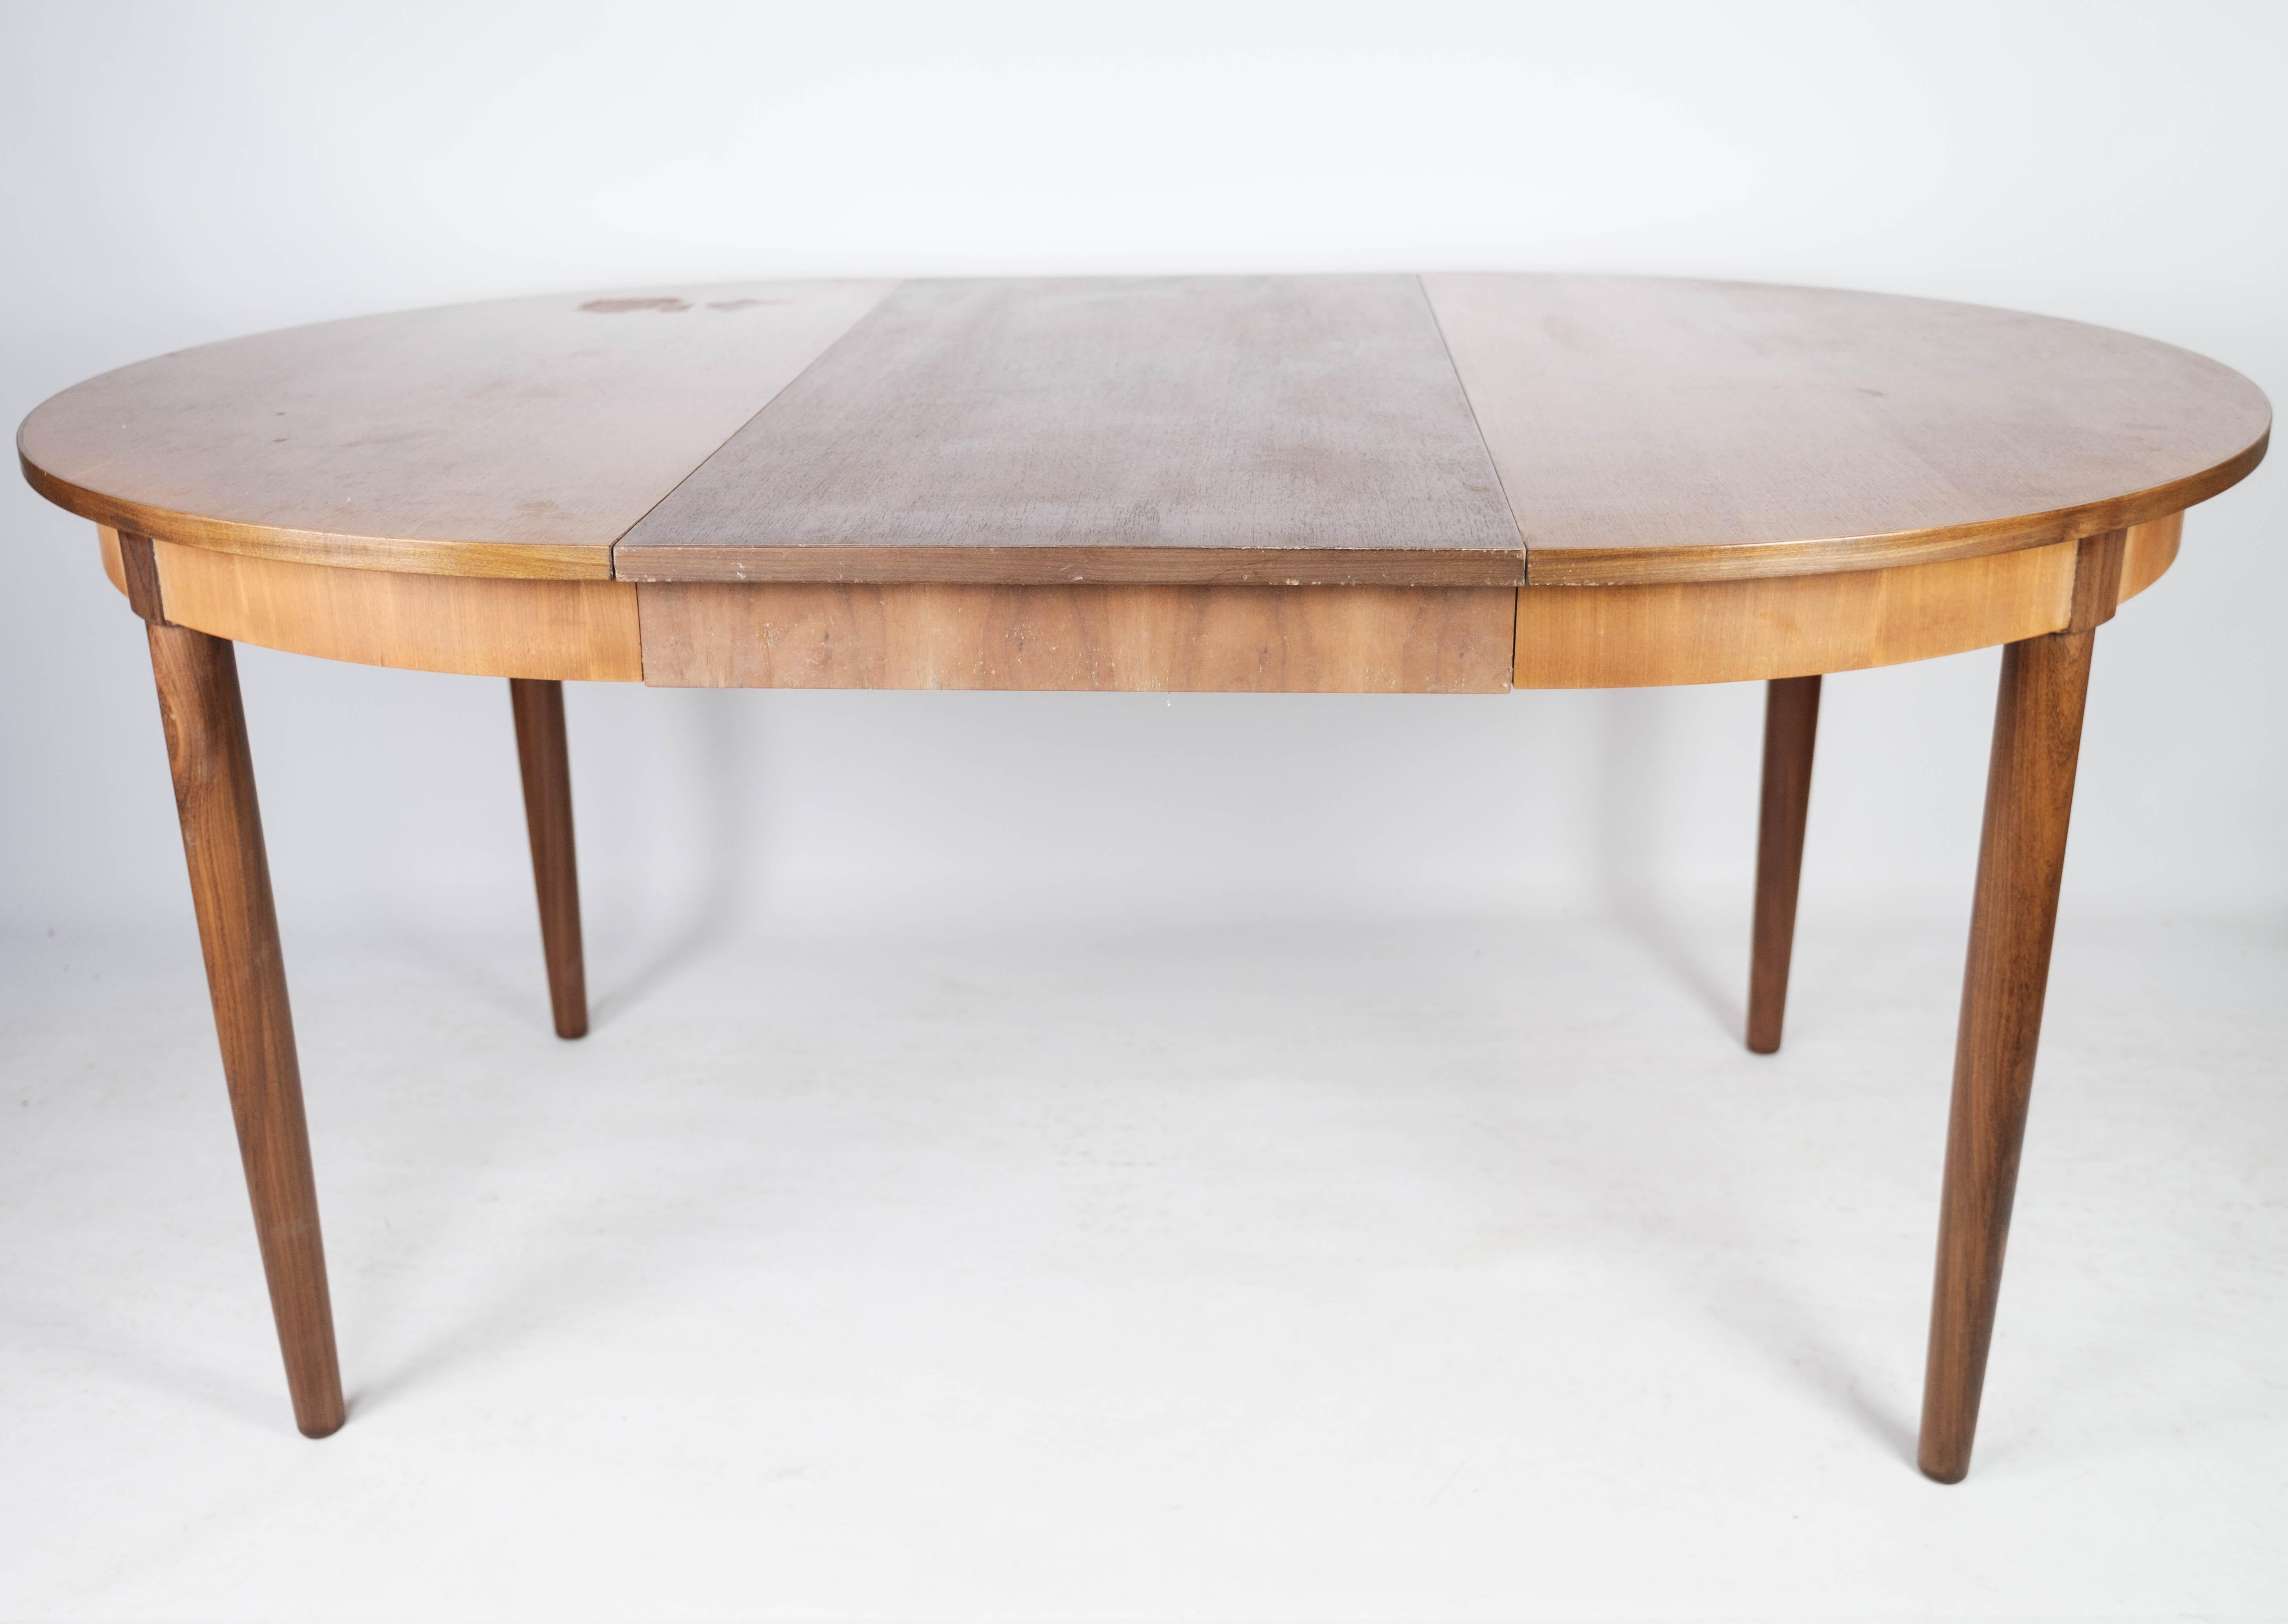 Dining Table Made In Teak With Extensions, Danish Design From 1960s For Sale 6